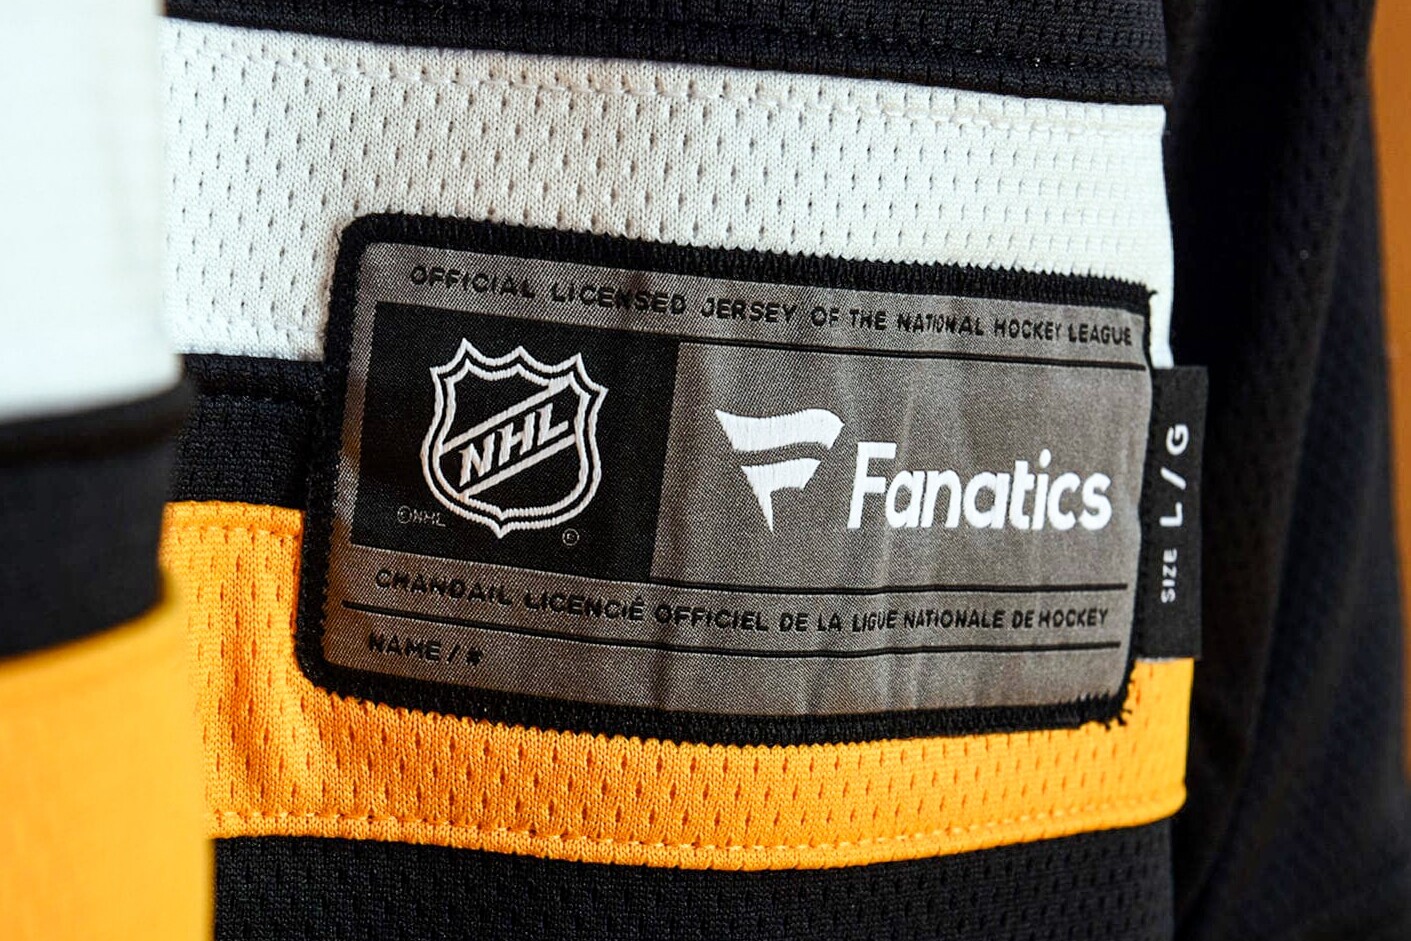 Next Steps For NHL As Adidas Ends Contract To Produce Jerseys